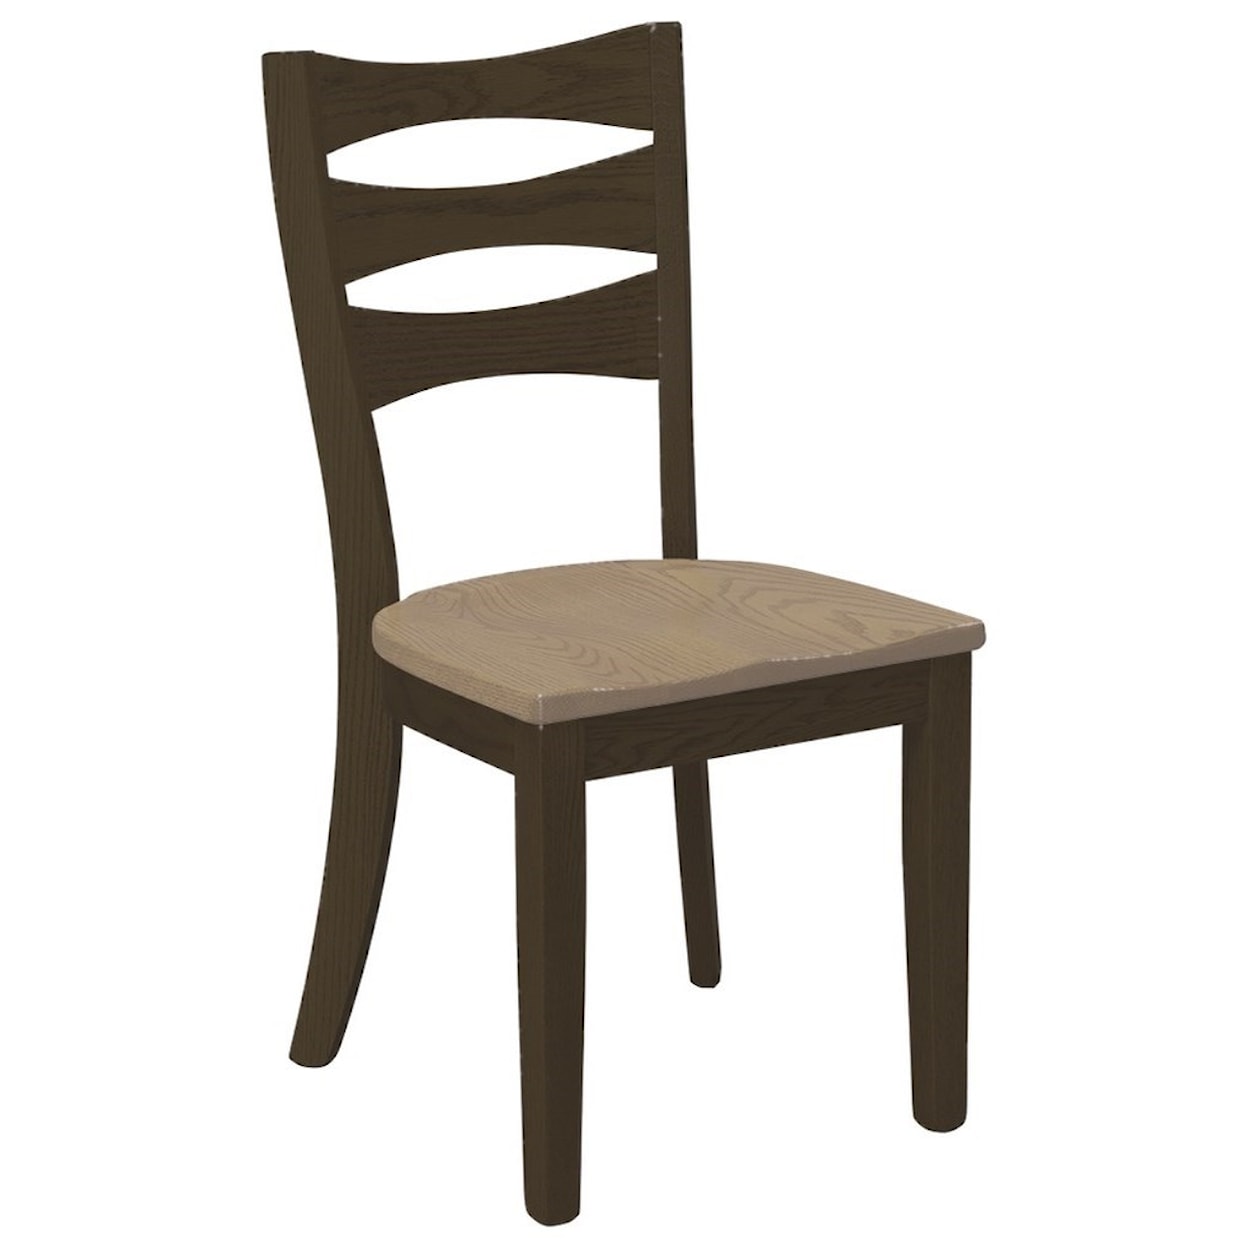 Daniel's Amish Chairs and Barstools Sierra Side Chair